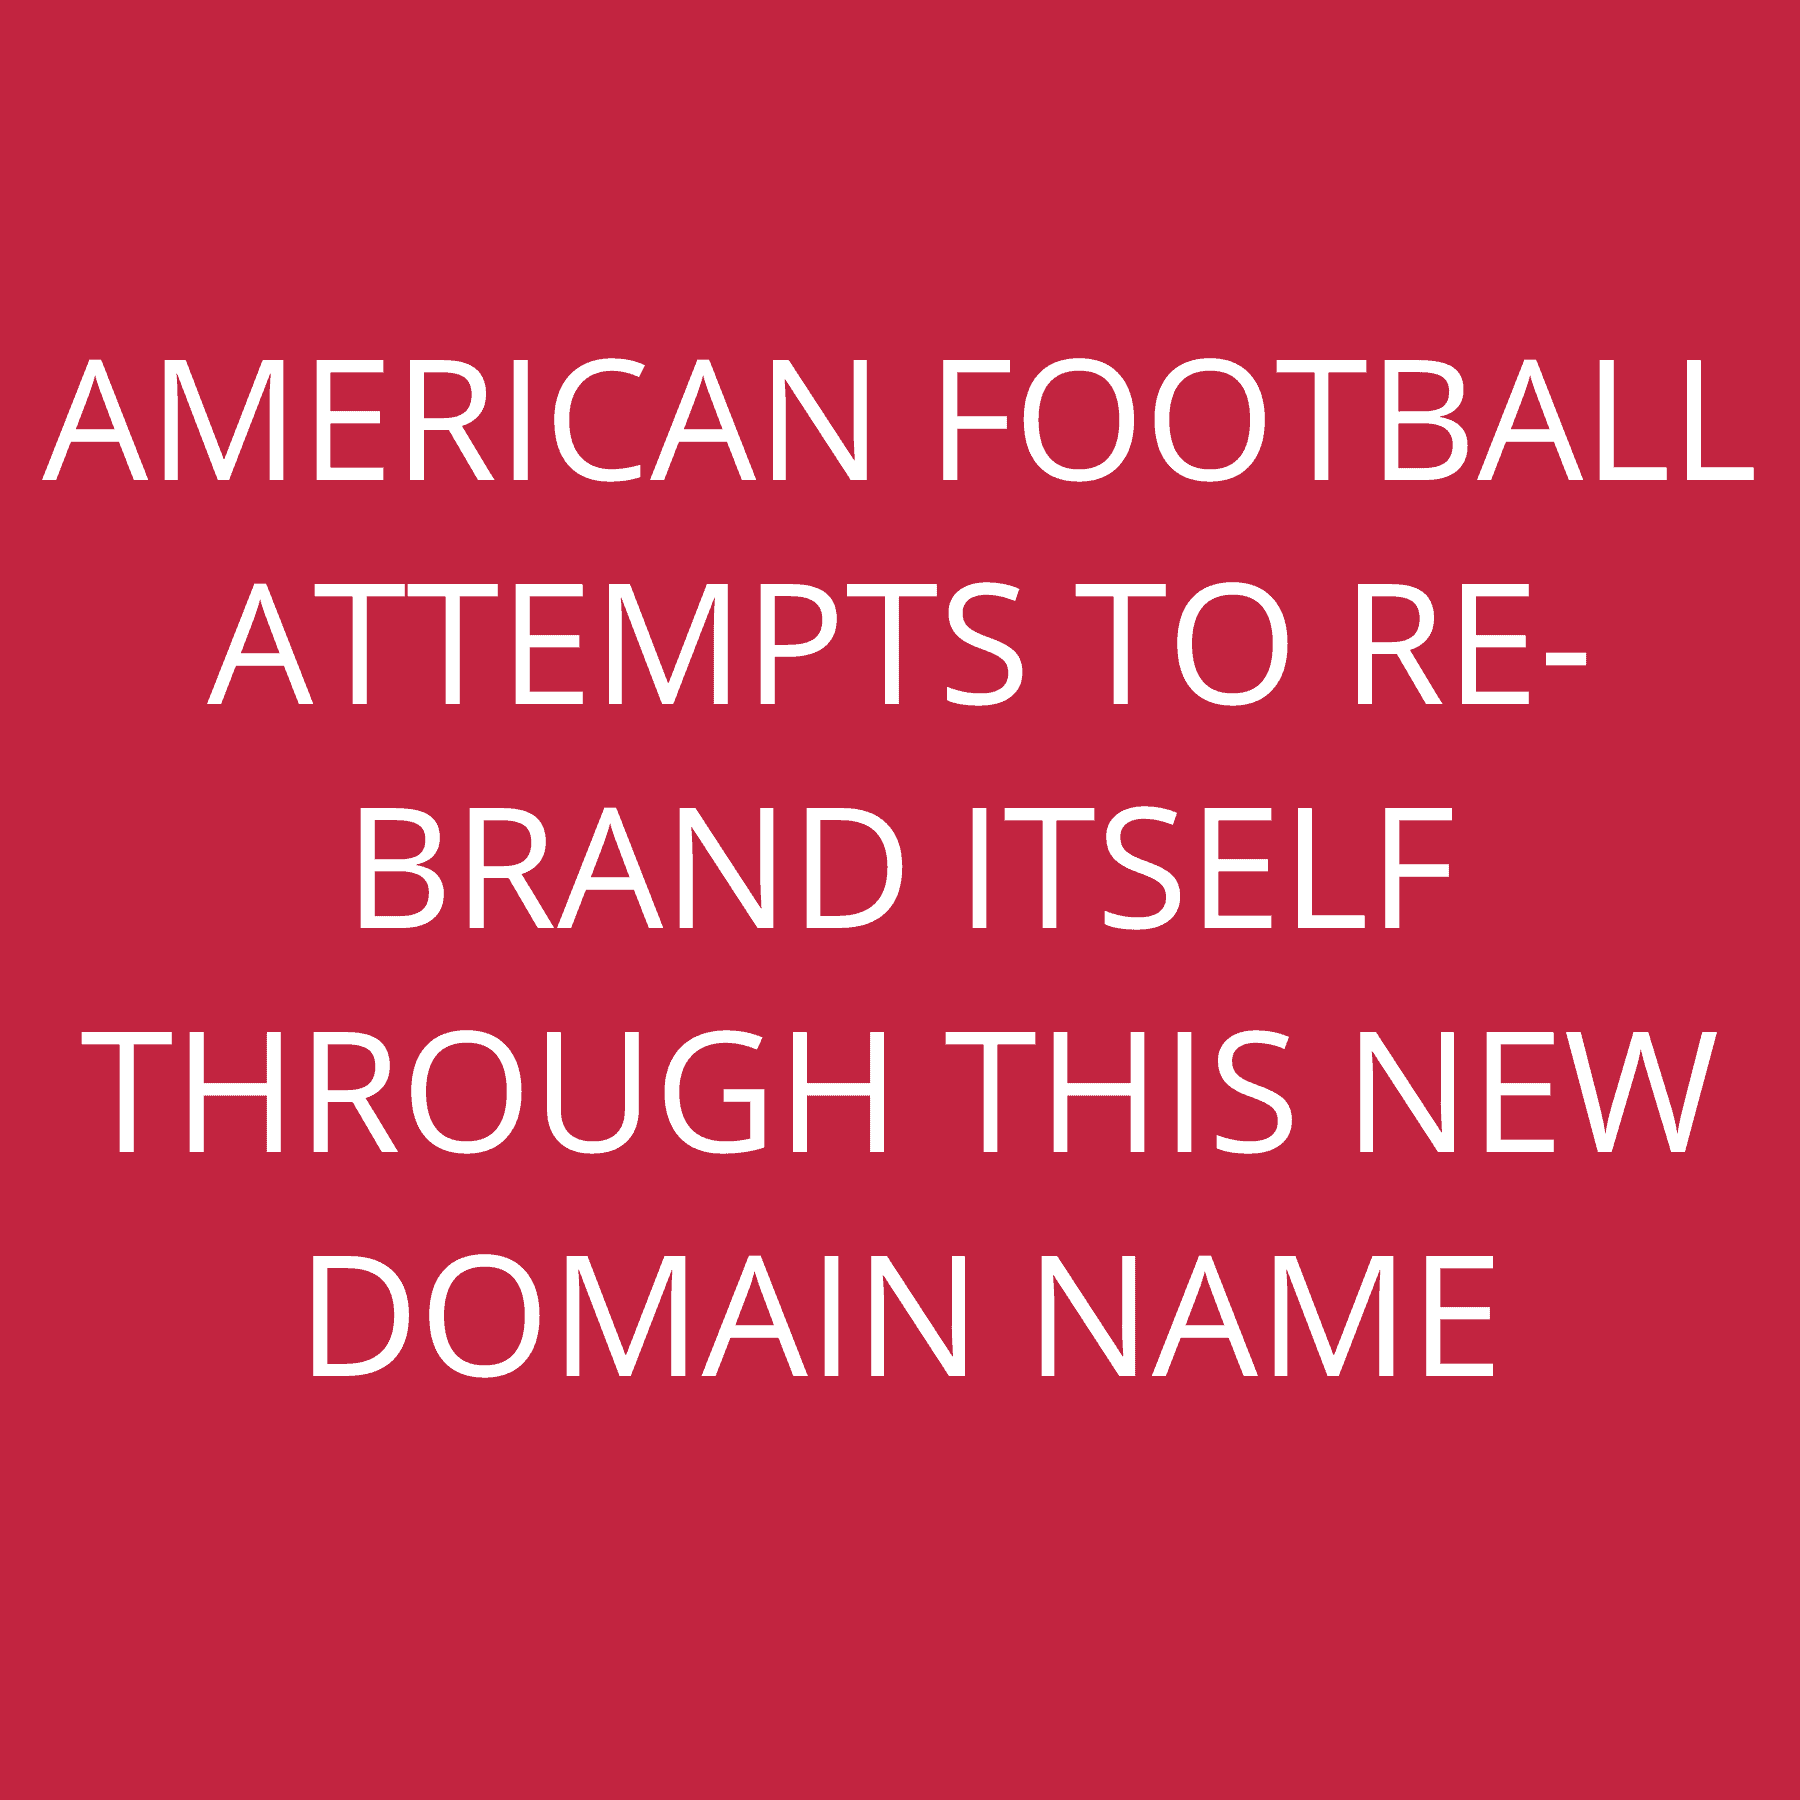 American Football attempts to RE-BRAND itself through this new domain name